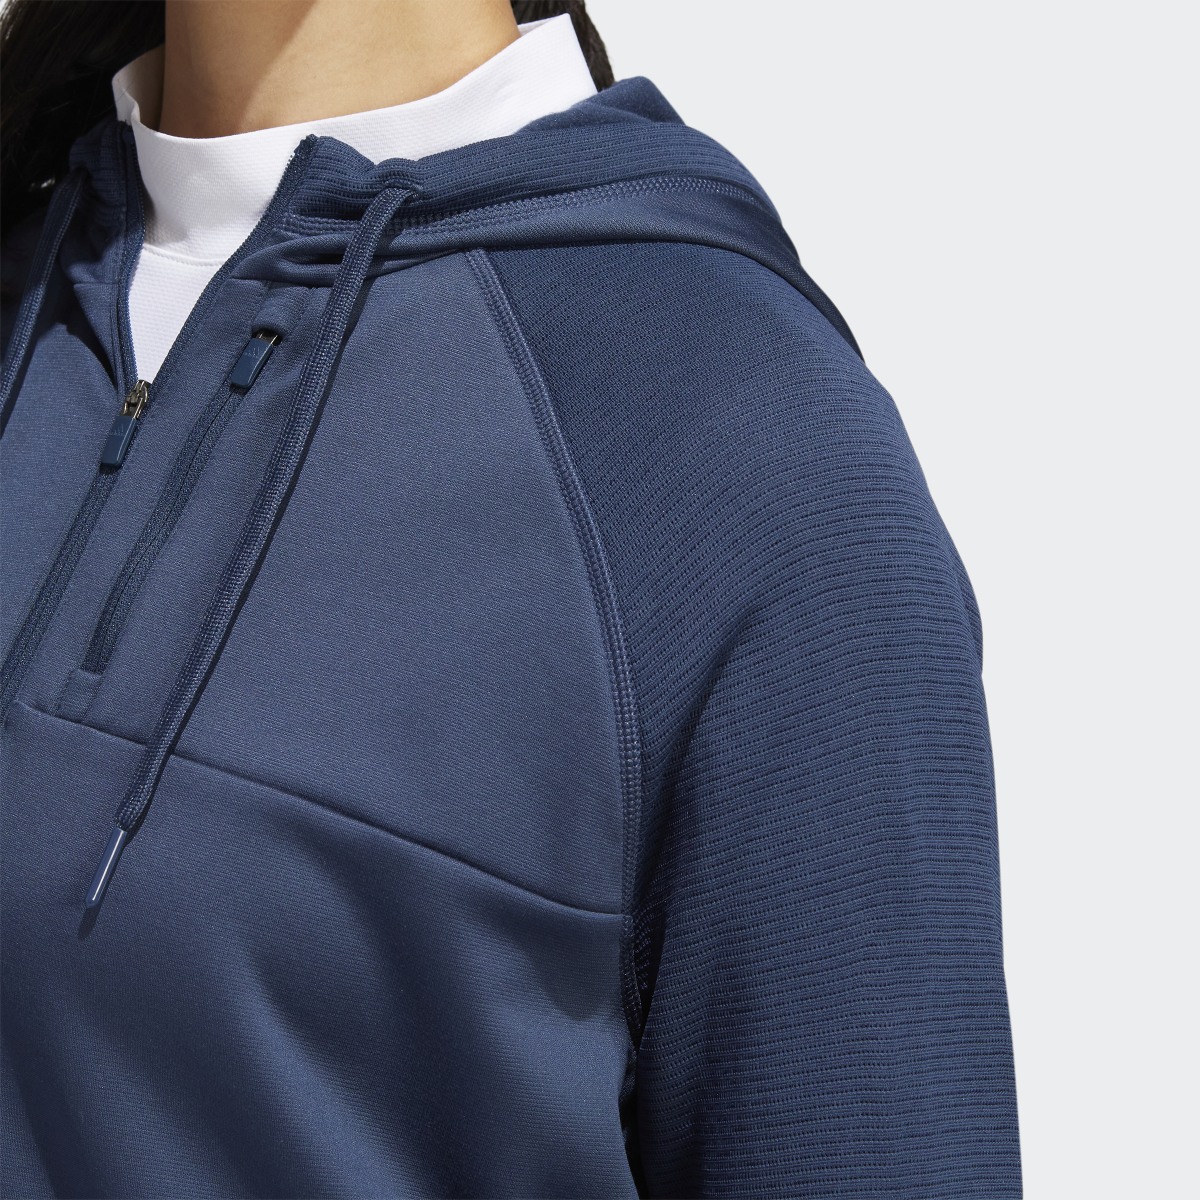 Adidas COLD.RDY Full-Zip Parka. 8